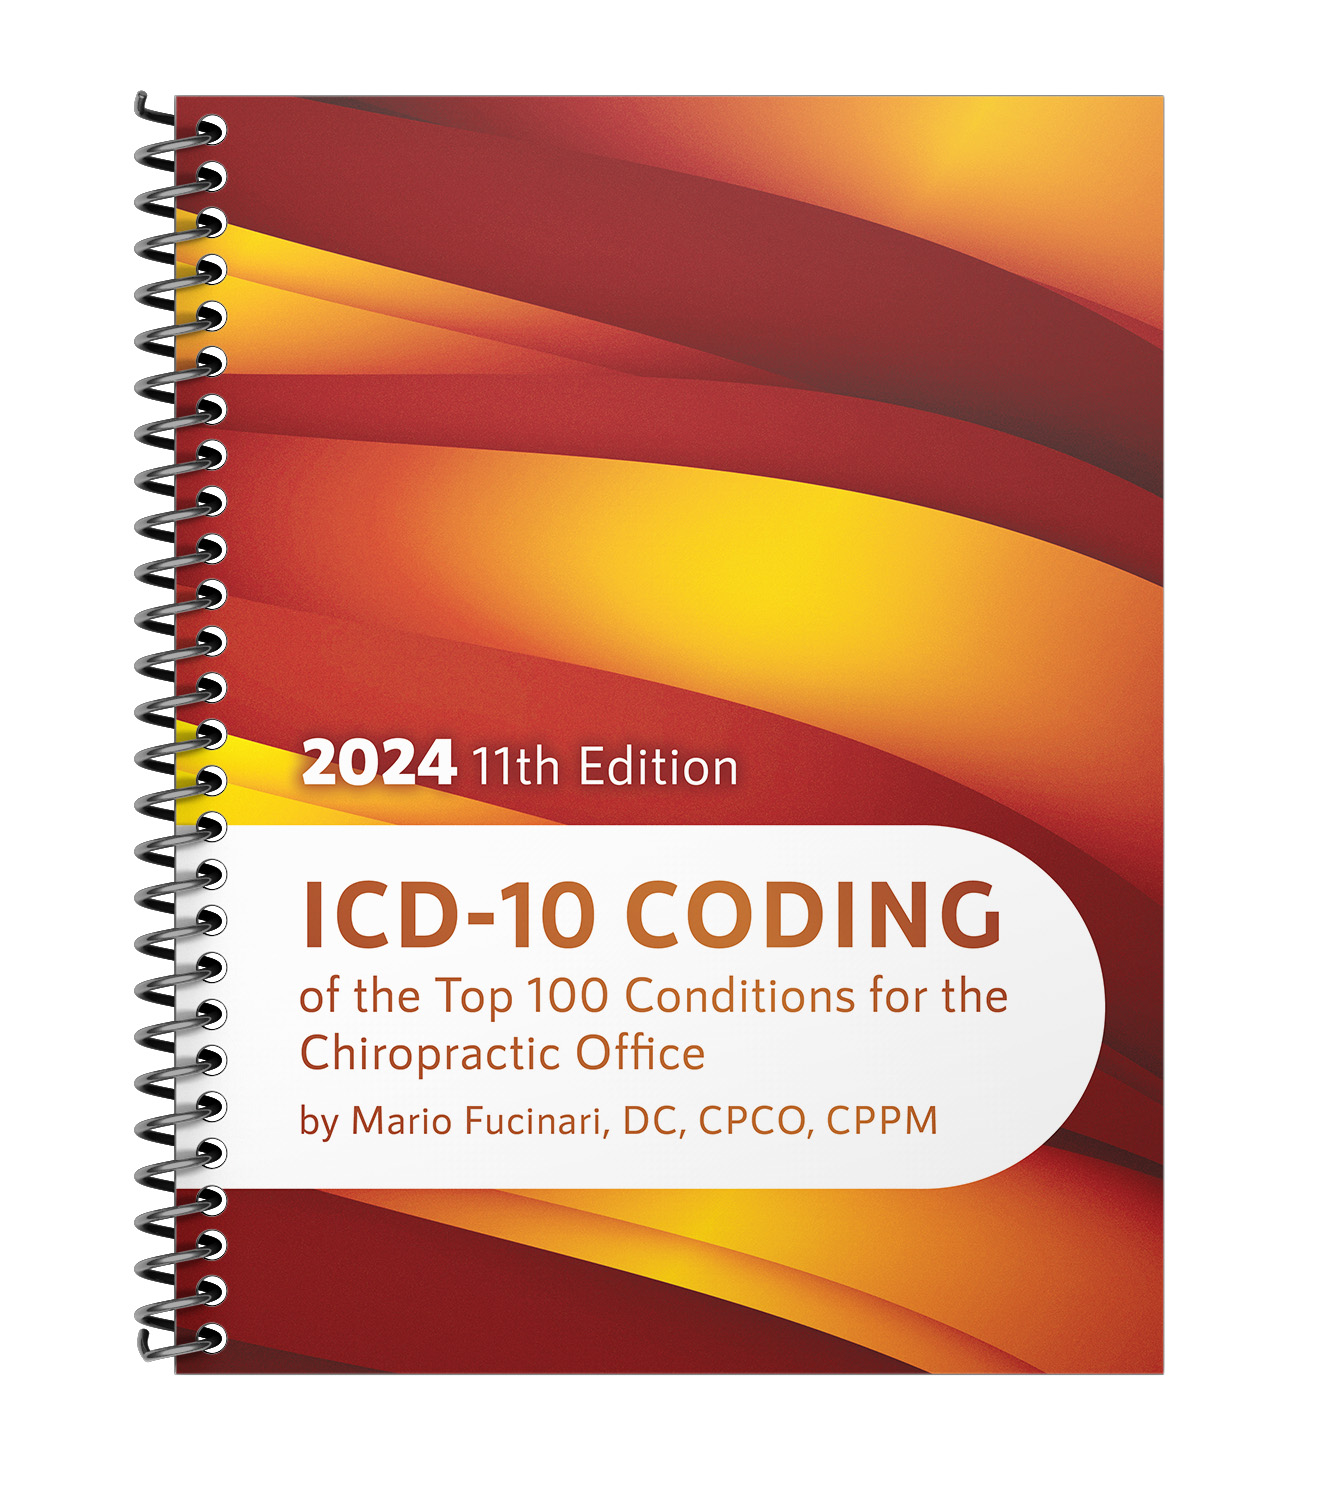 ICD-10 Coding of the Top 100 Conditions for the Chiropractic Office - Eleventh Ed. (2024)